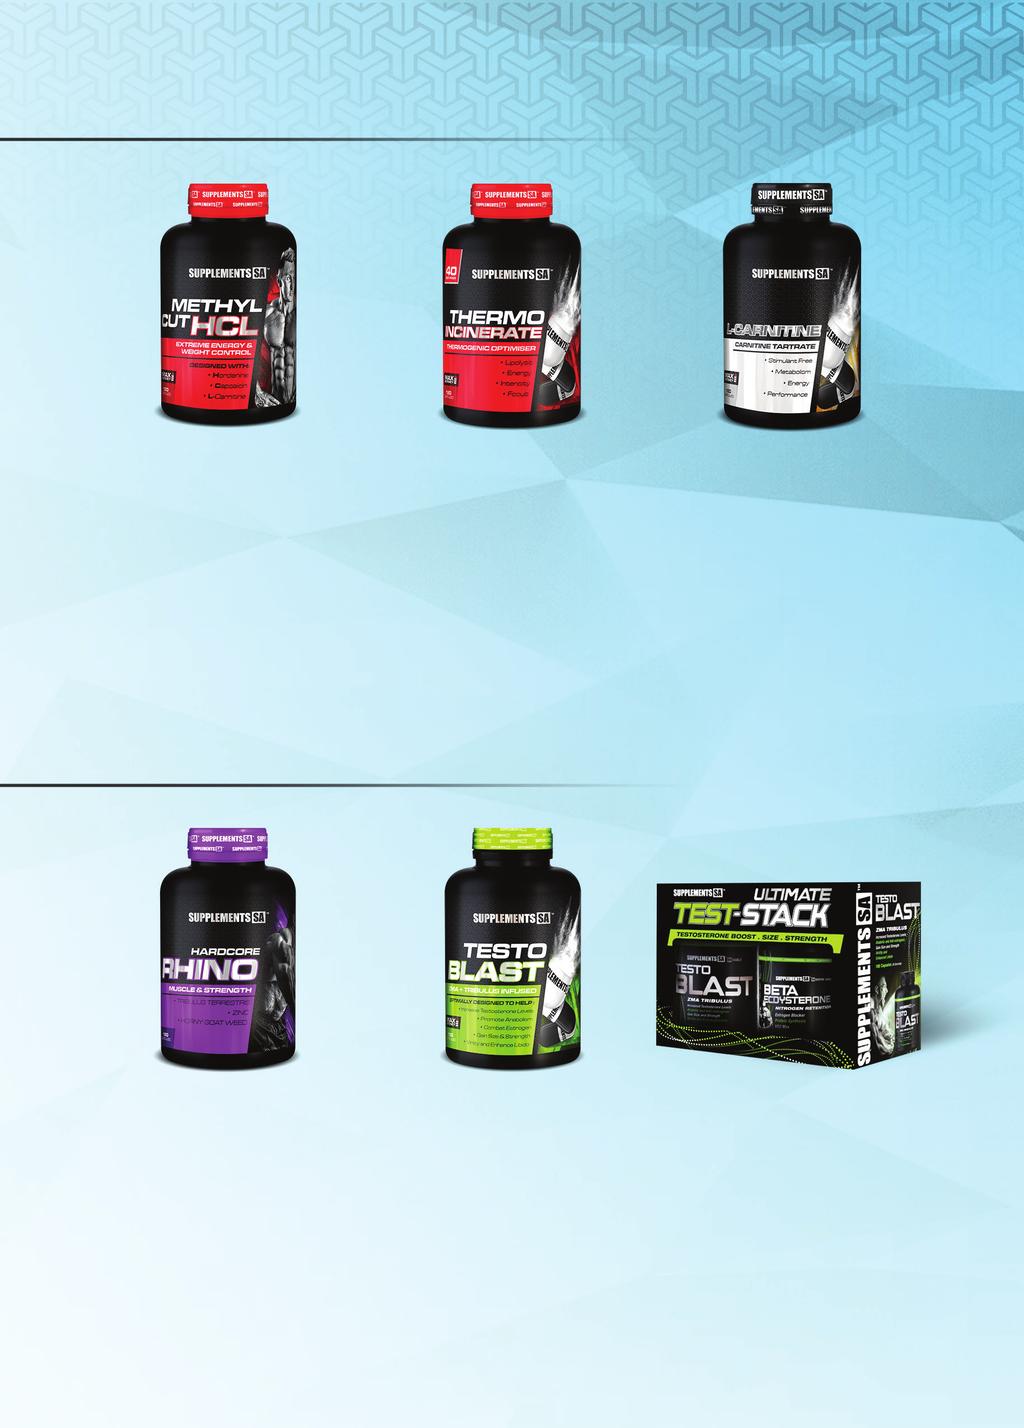 BURNERS MethylCut HCL Extreme Energy & Weight Control Hordenine Capsaicin L-Carnitine Thermo Incinerate Thermogenic Optimiser Lipolysis Energy Intensity Focus L-Carnitine Carnitine Tartrate Stimulant